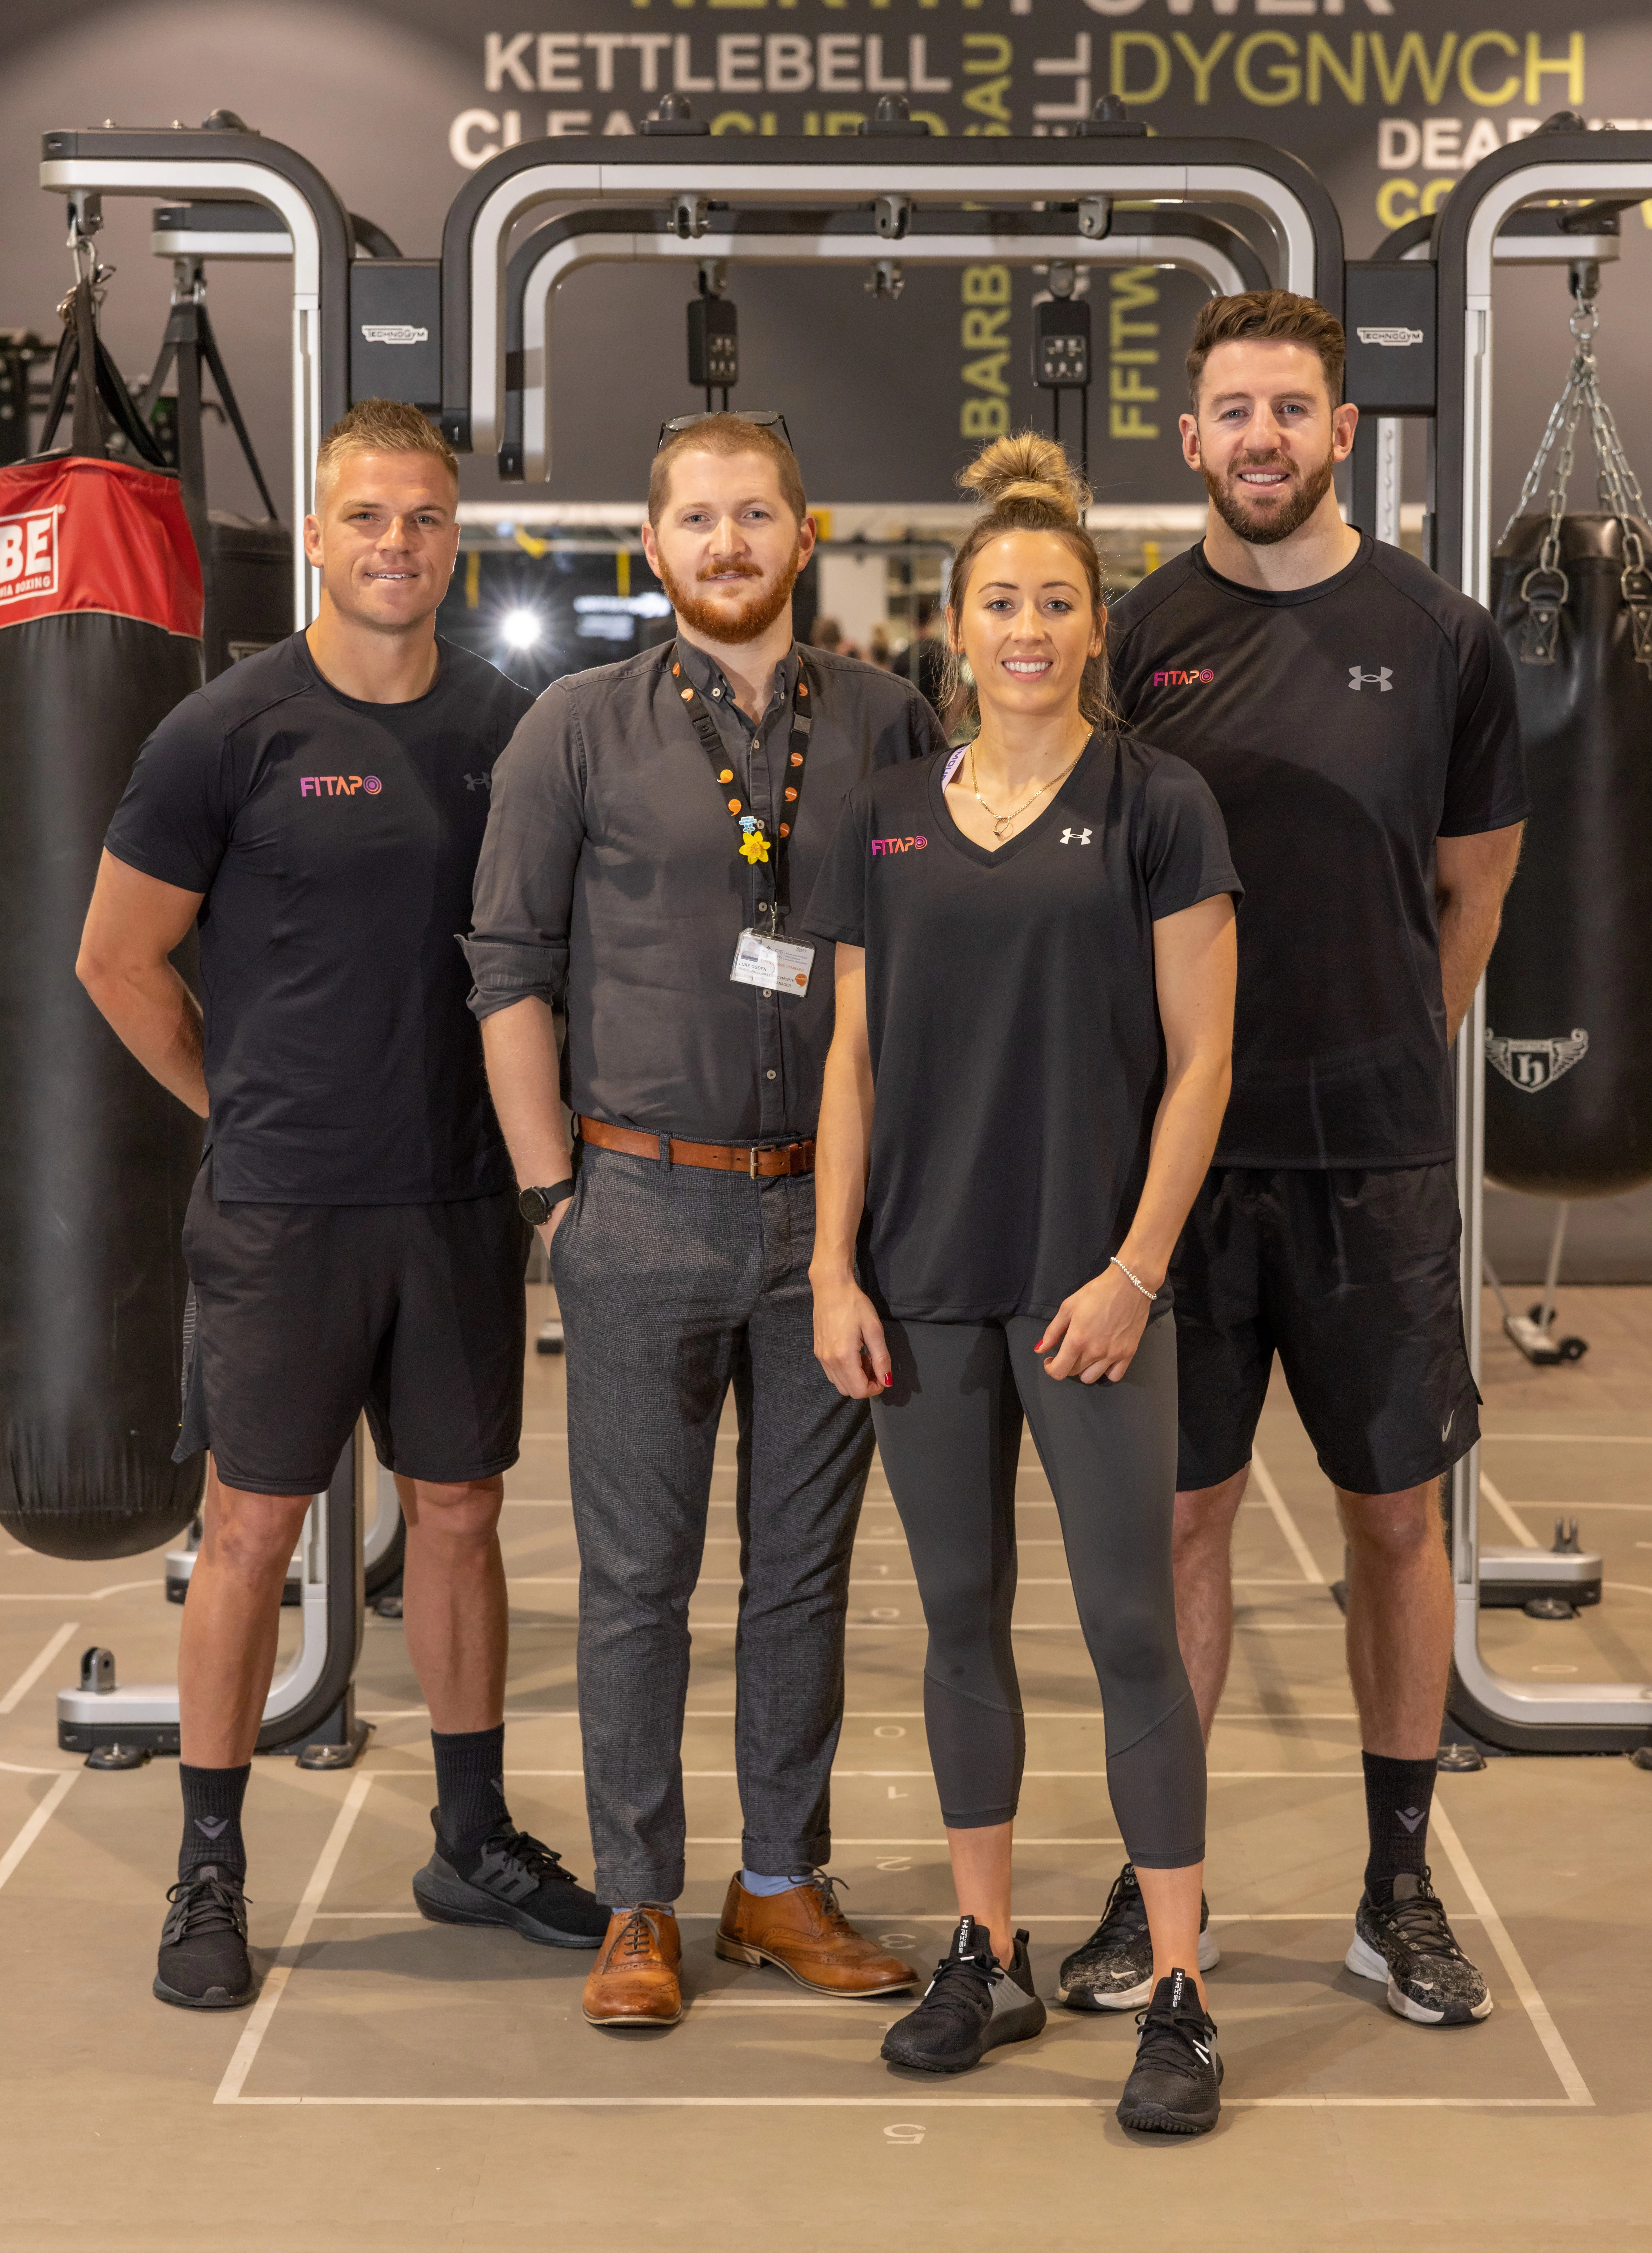 Fitap founder Alex Cuthbert – who launched the app with Wales rugby union teammate Gareth Anscombe and Welsh CEO and entrepreneur Dean Jones – is proud to be in association with CALL.